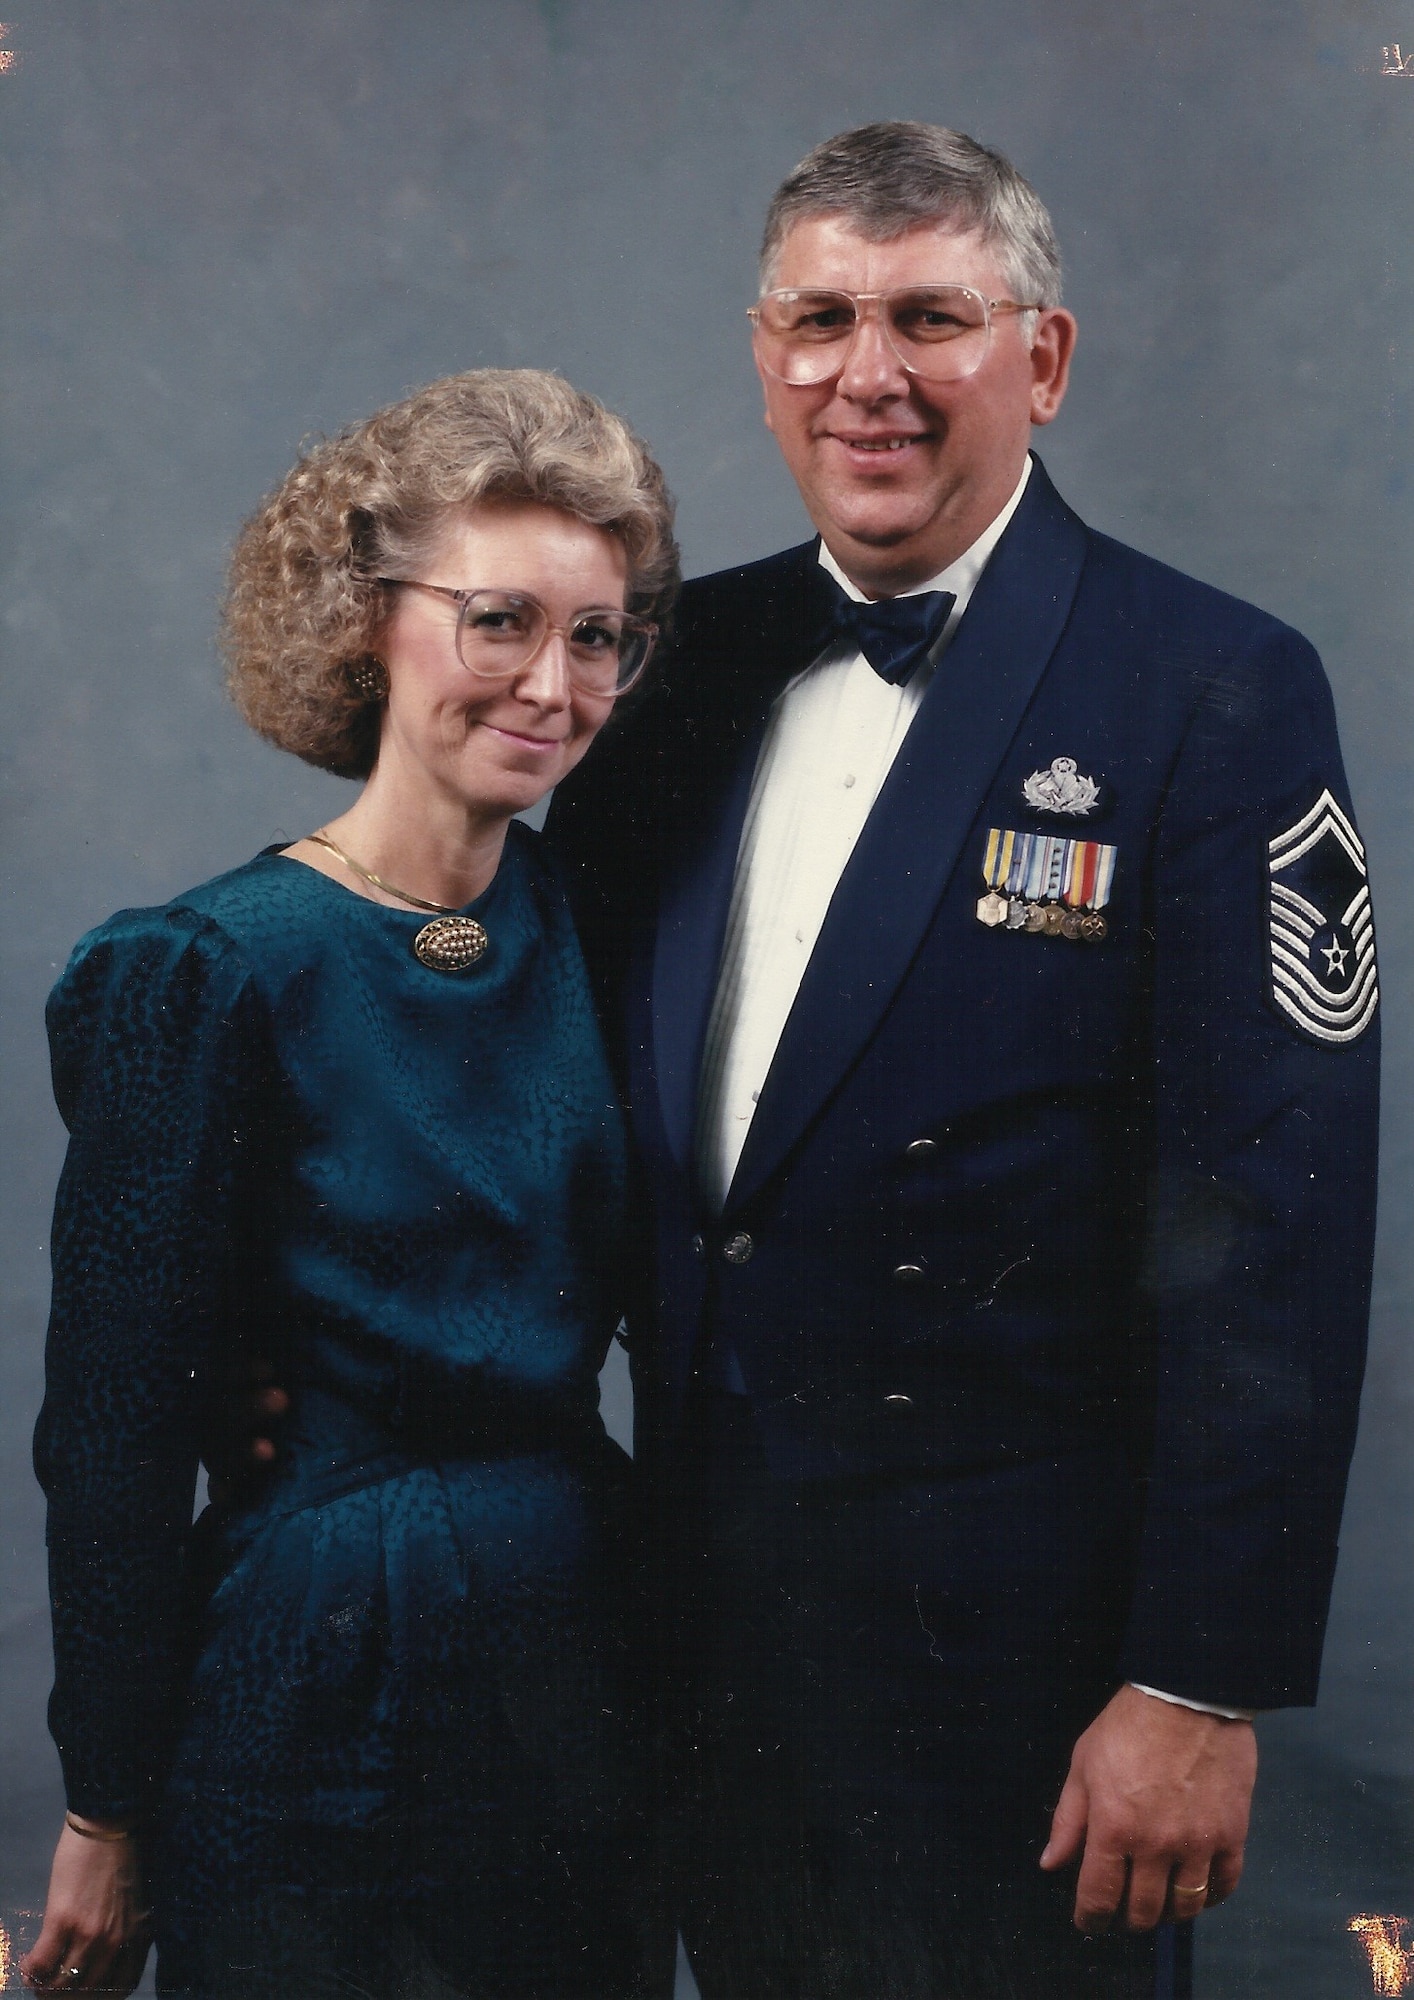 Chief Master Sgt. John Konietzko (ret) poses for a photo with his wife, Kay at a formal military event. (Courtesy Photo)